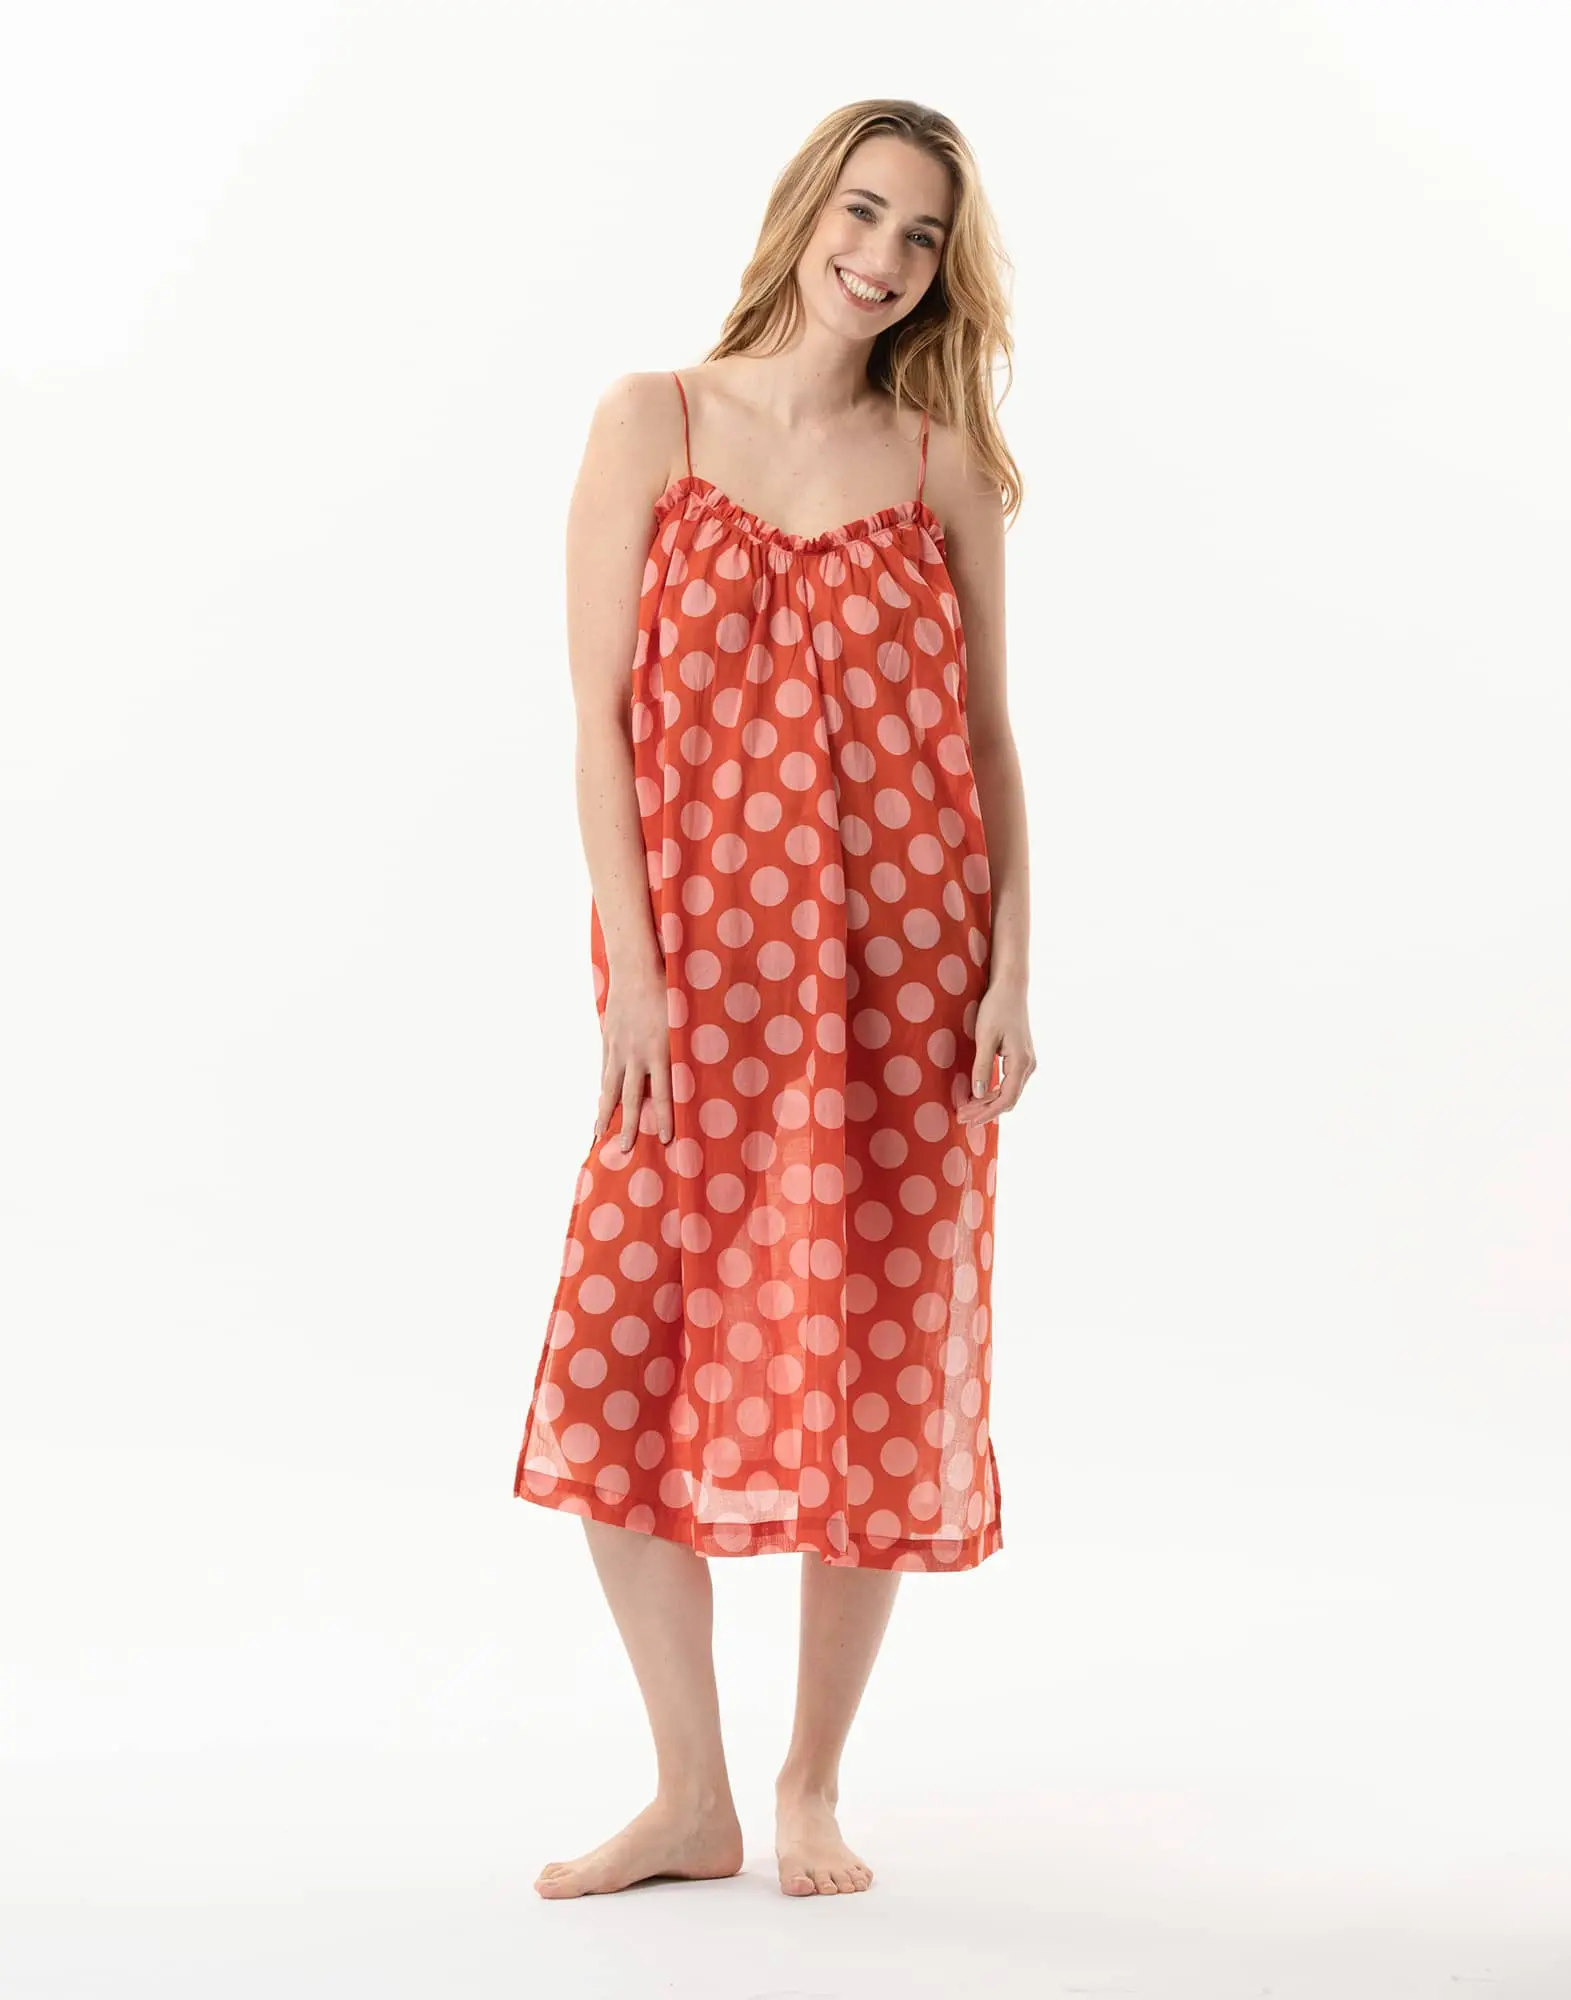 Polka dot printed dress in 100% cotton RIVA 740 pink | Lingerie le Chat